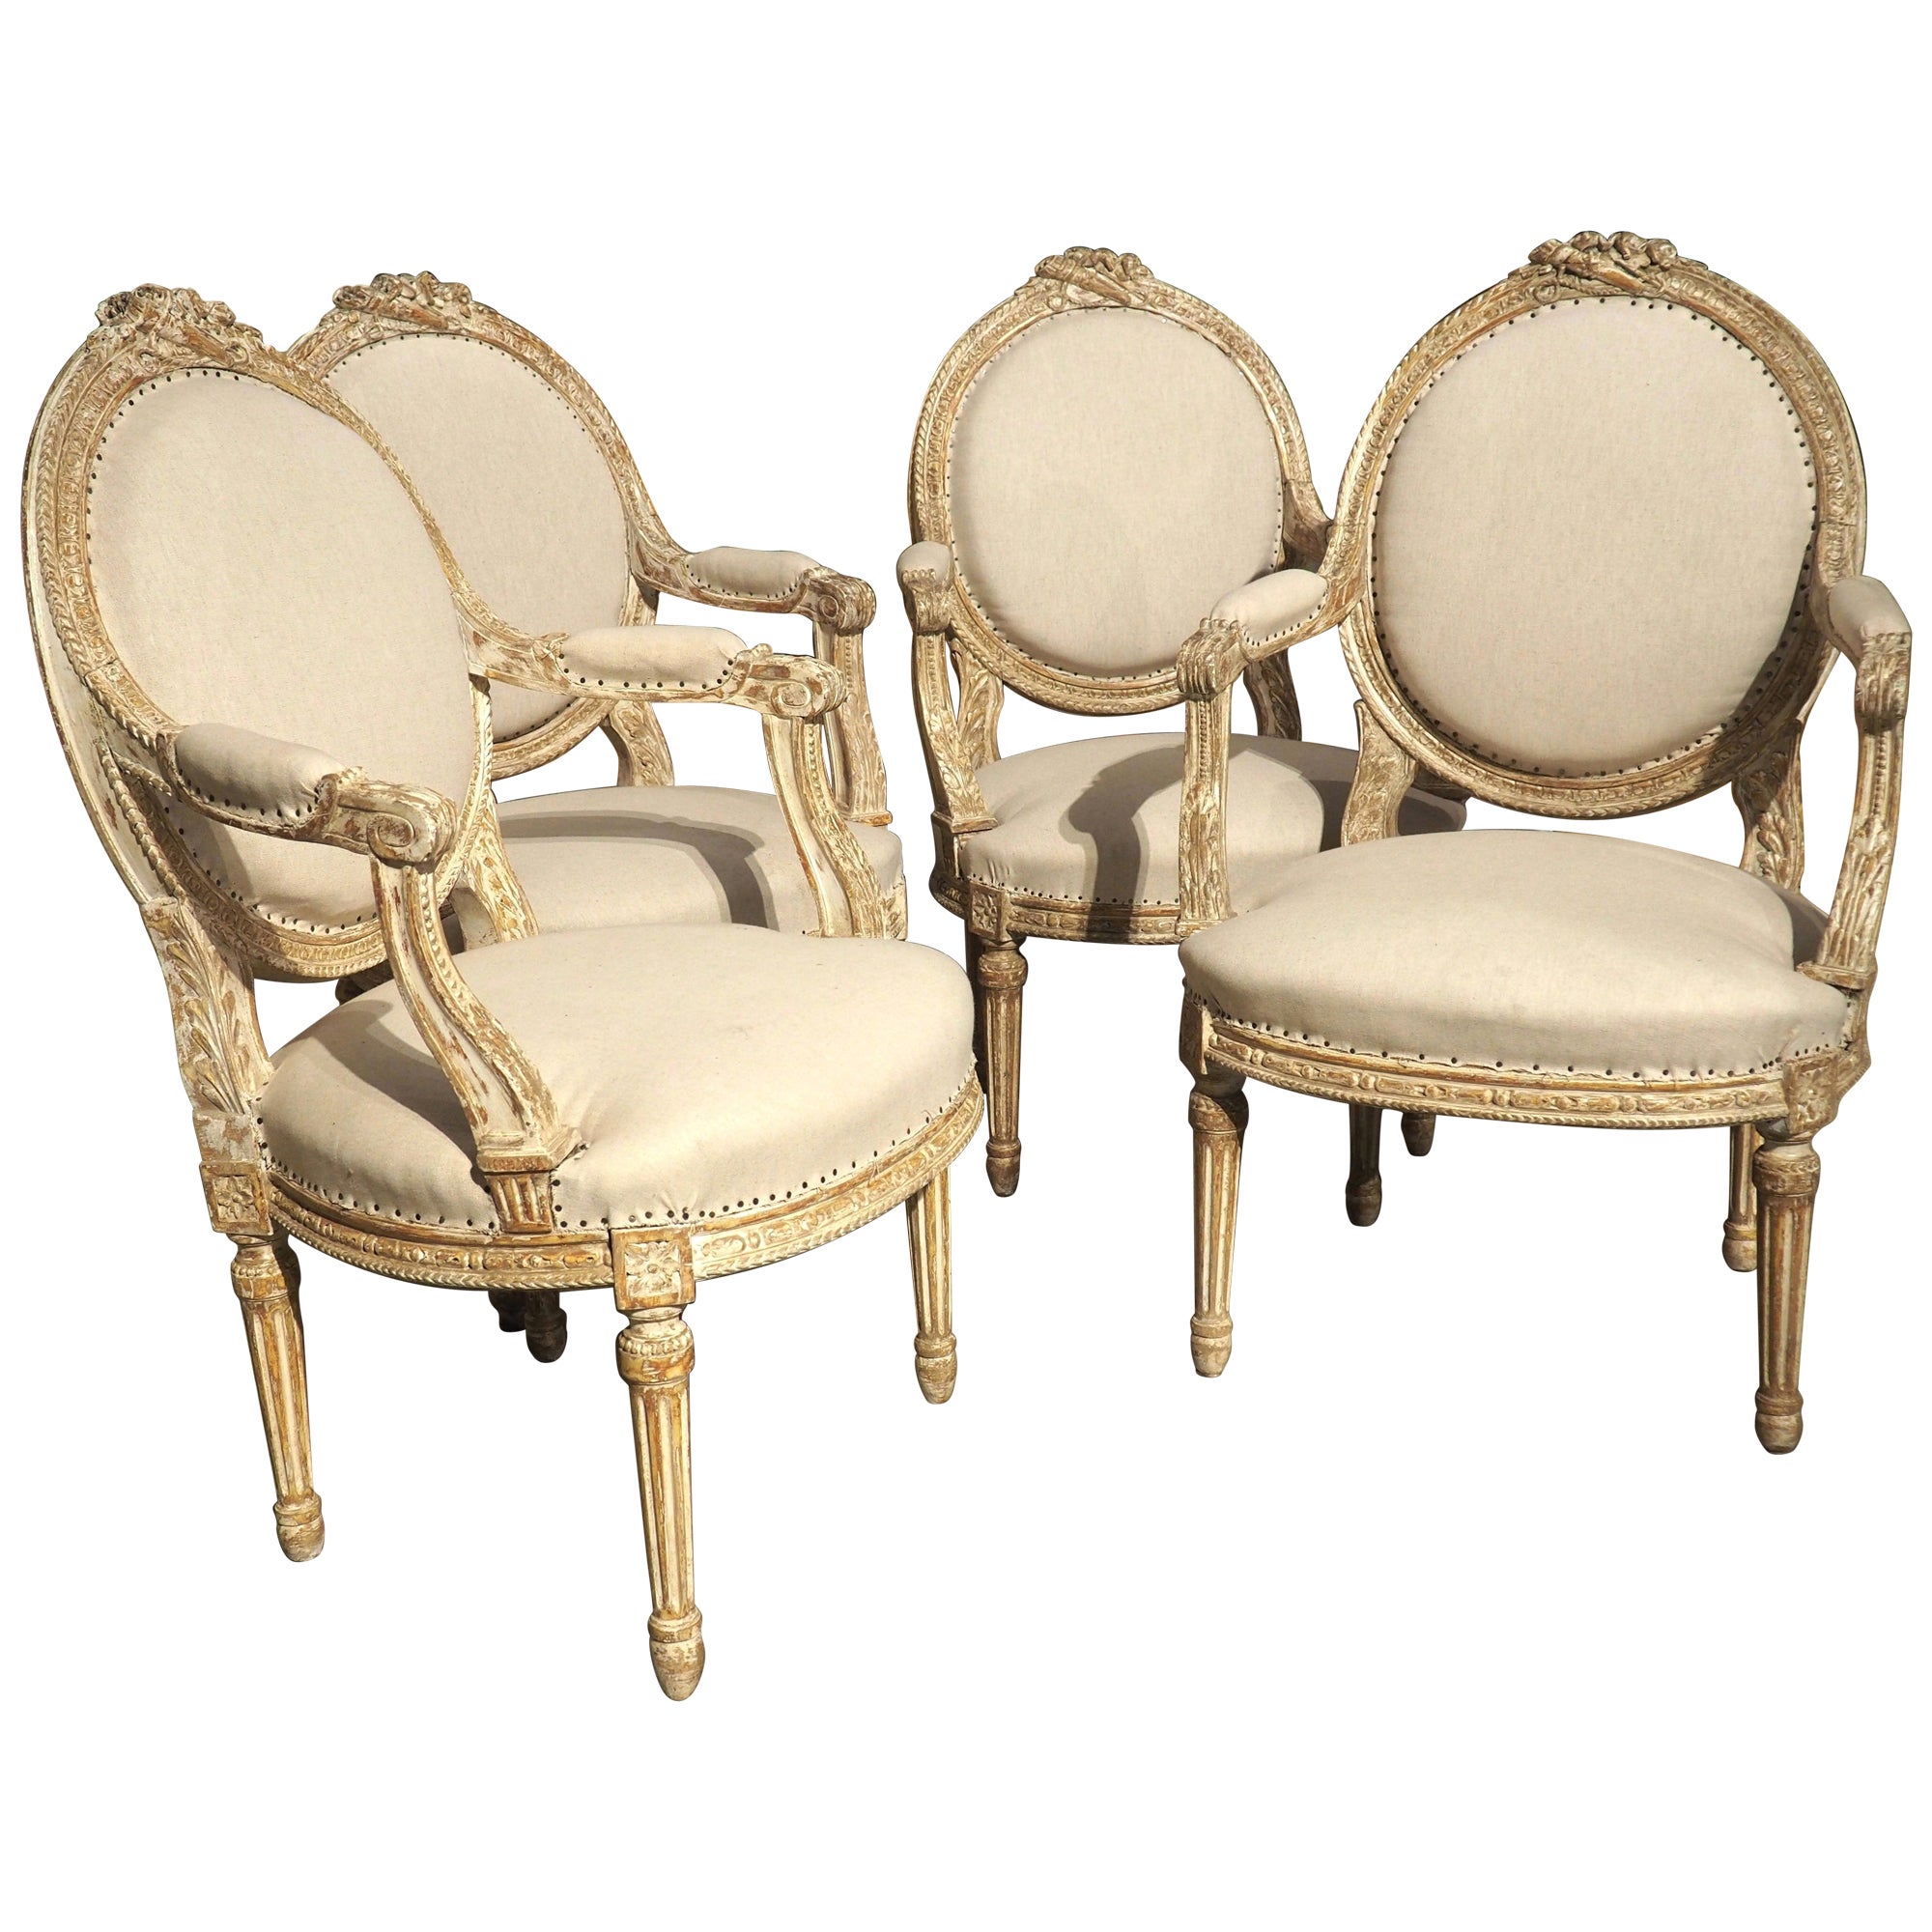 Set of 4 French Parcel Paint Louis XVI Style Cabriolet Armchairs, Circa 1885